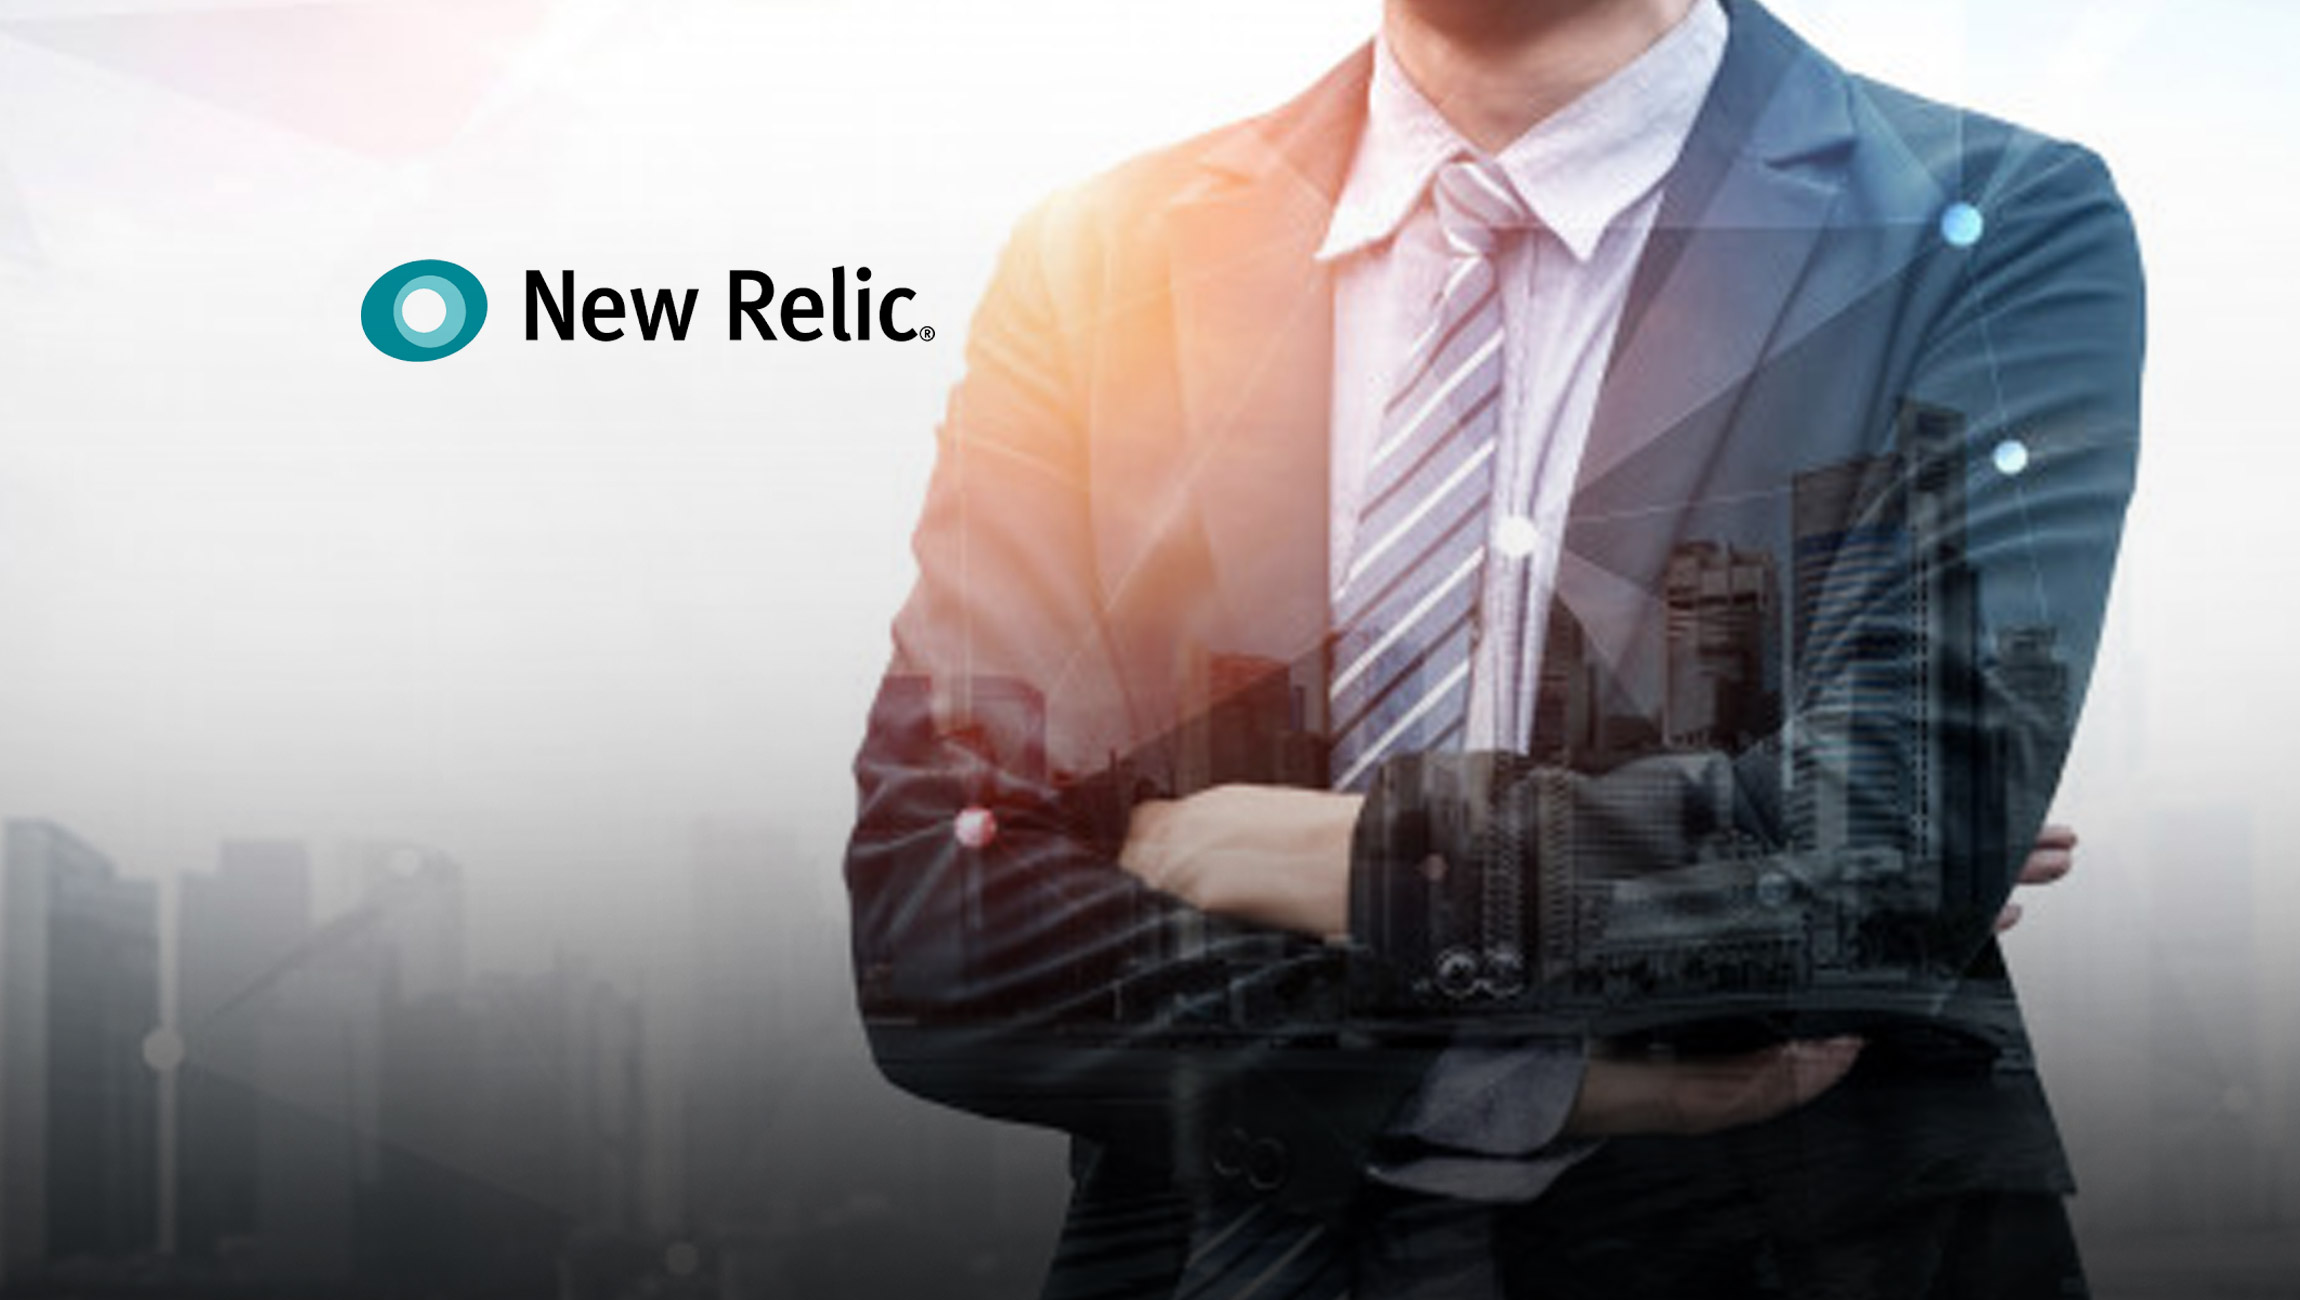 New Relic Named a Leader in Gartner’s Magic Quadrant for Application Performance Monitoring for Eighth Consecutive Reports